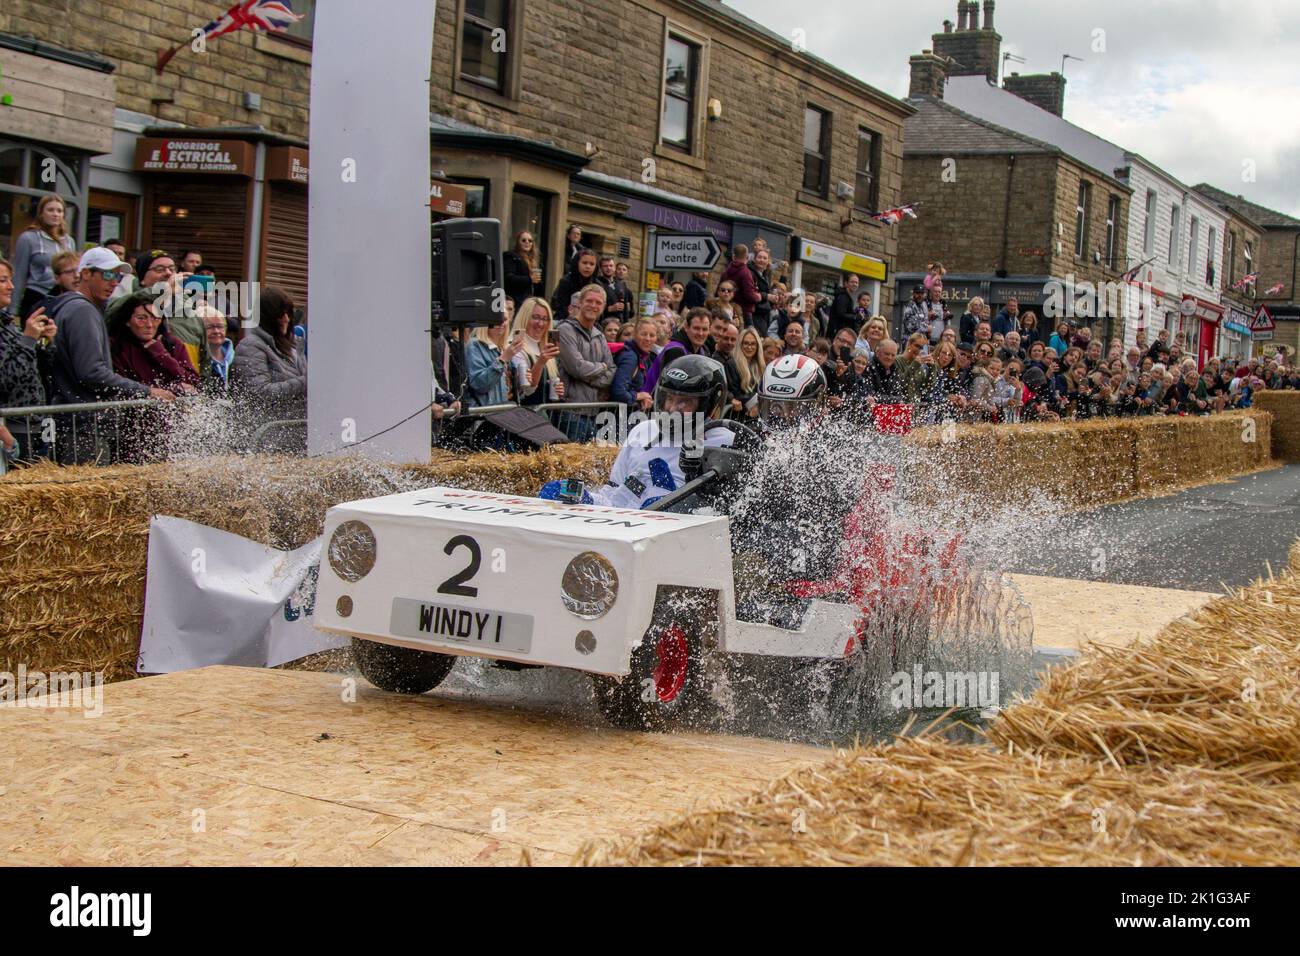 Longridge, Preston. UK News 18 September 2022; Soapbox Derby community charity event happening in the heart of the village of Longridge, Lancashire. A day of “family fun, racing, wacky costumes and carts, thrills and spills” attracted thousands of visitors to the town's main street. Motorless, hand-made, wooden vehicles raced down Berry Lane as the village's main high street was converted into an unusual race track for the day. The event has been organised to raise vital funds for local charity Longridge Community Action. Credit ; MediaWorldImages/Alamy LiveNews Stock Photo